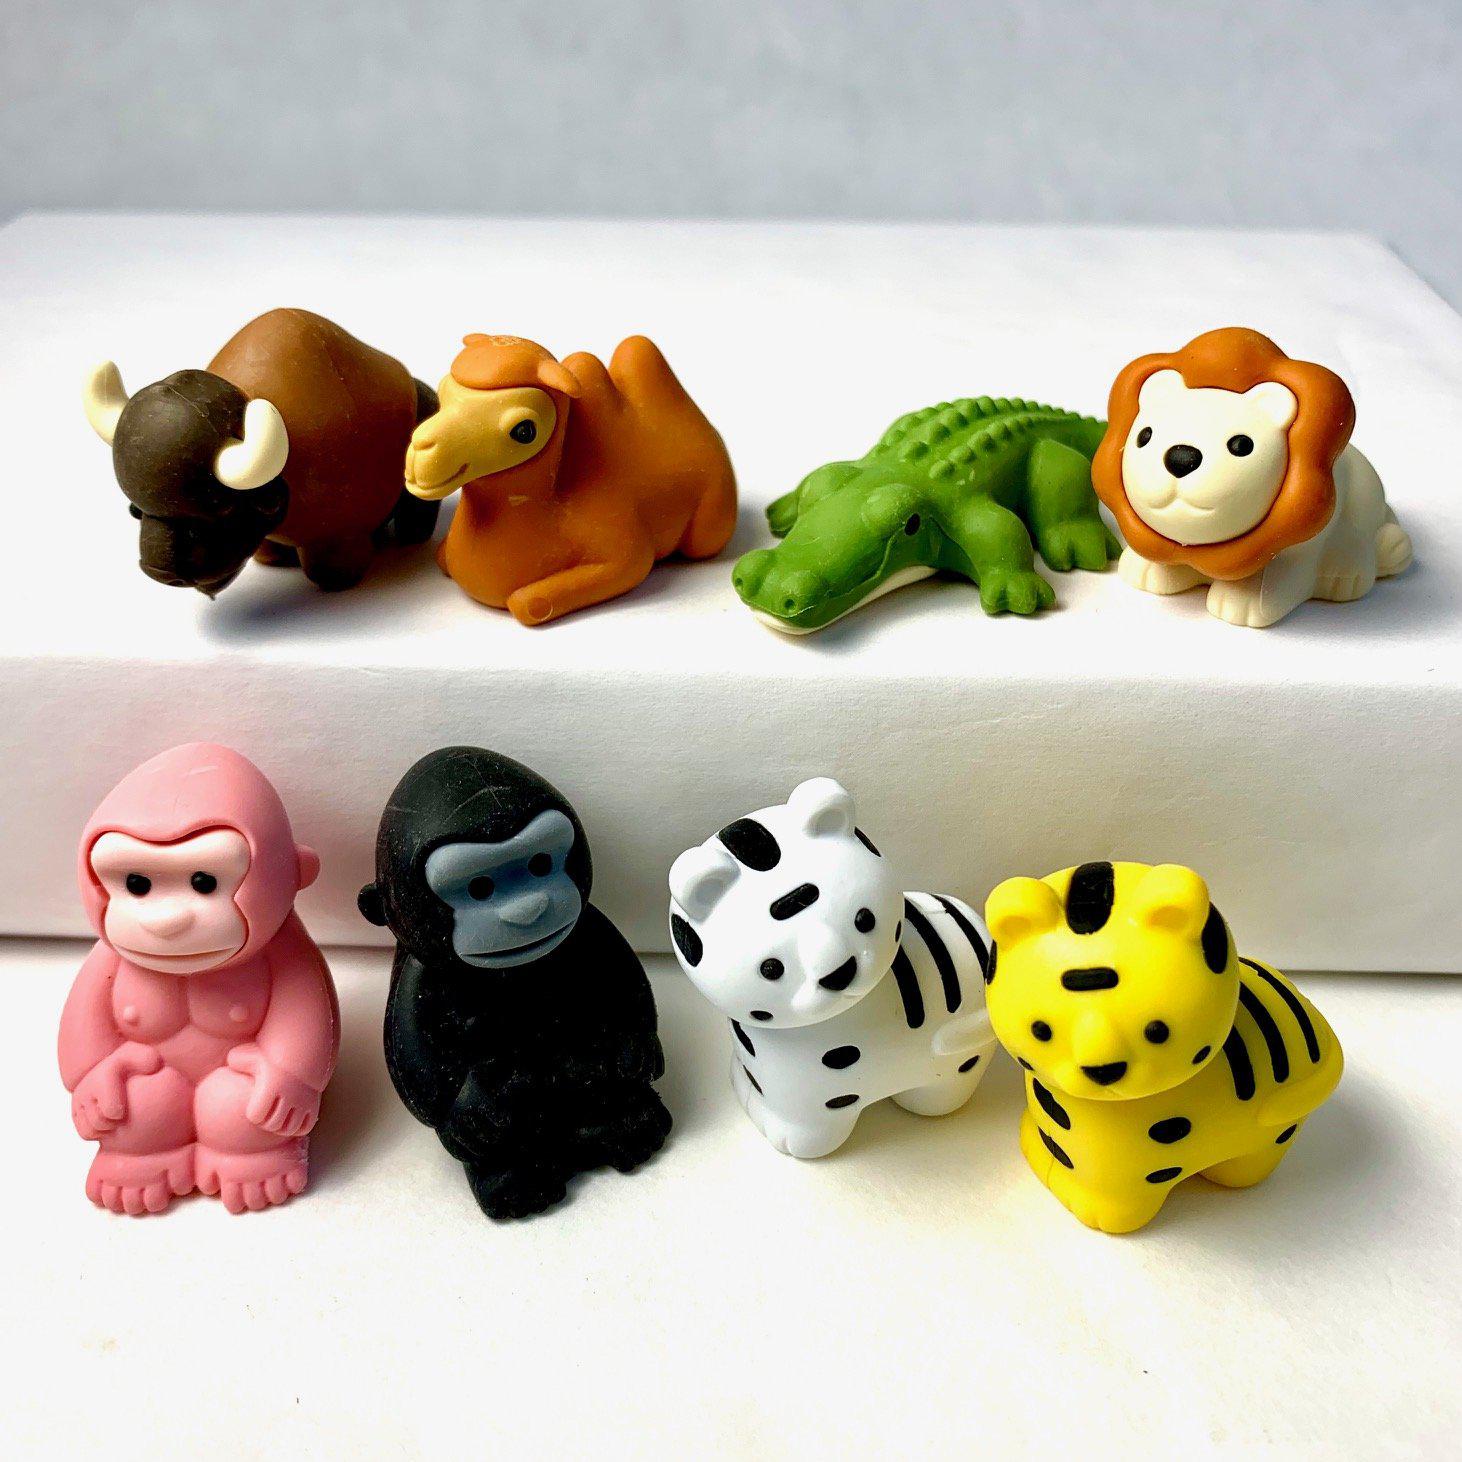 Front view of a variety of Puzzle Eraser-Safari including an alligator, bison, pink and black gorillas, lion, camel, and yellow and white tigers.